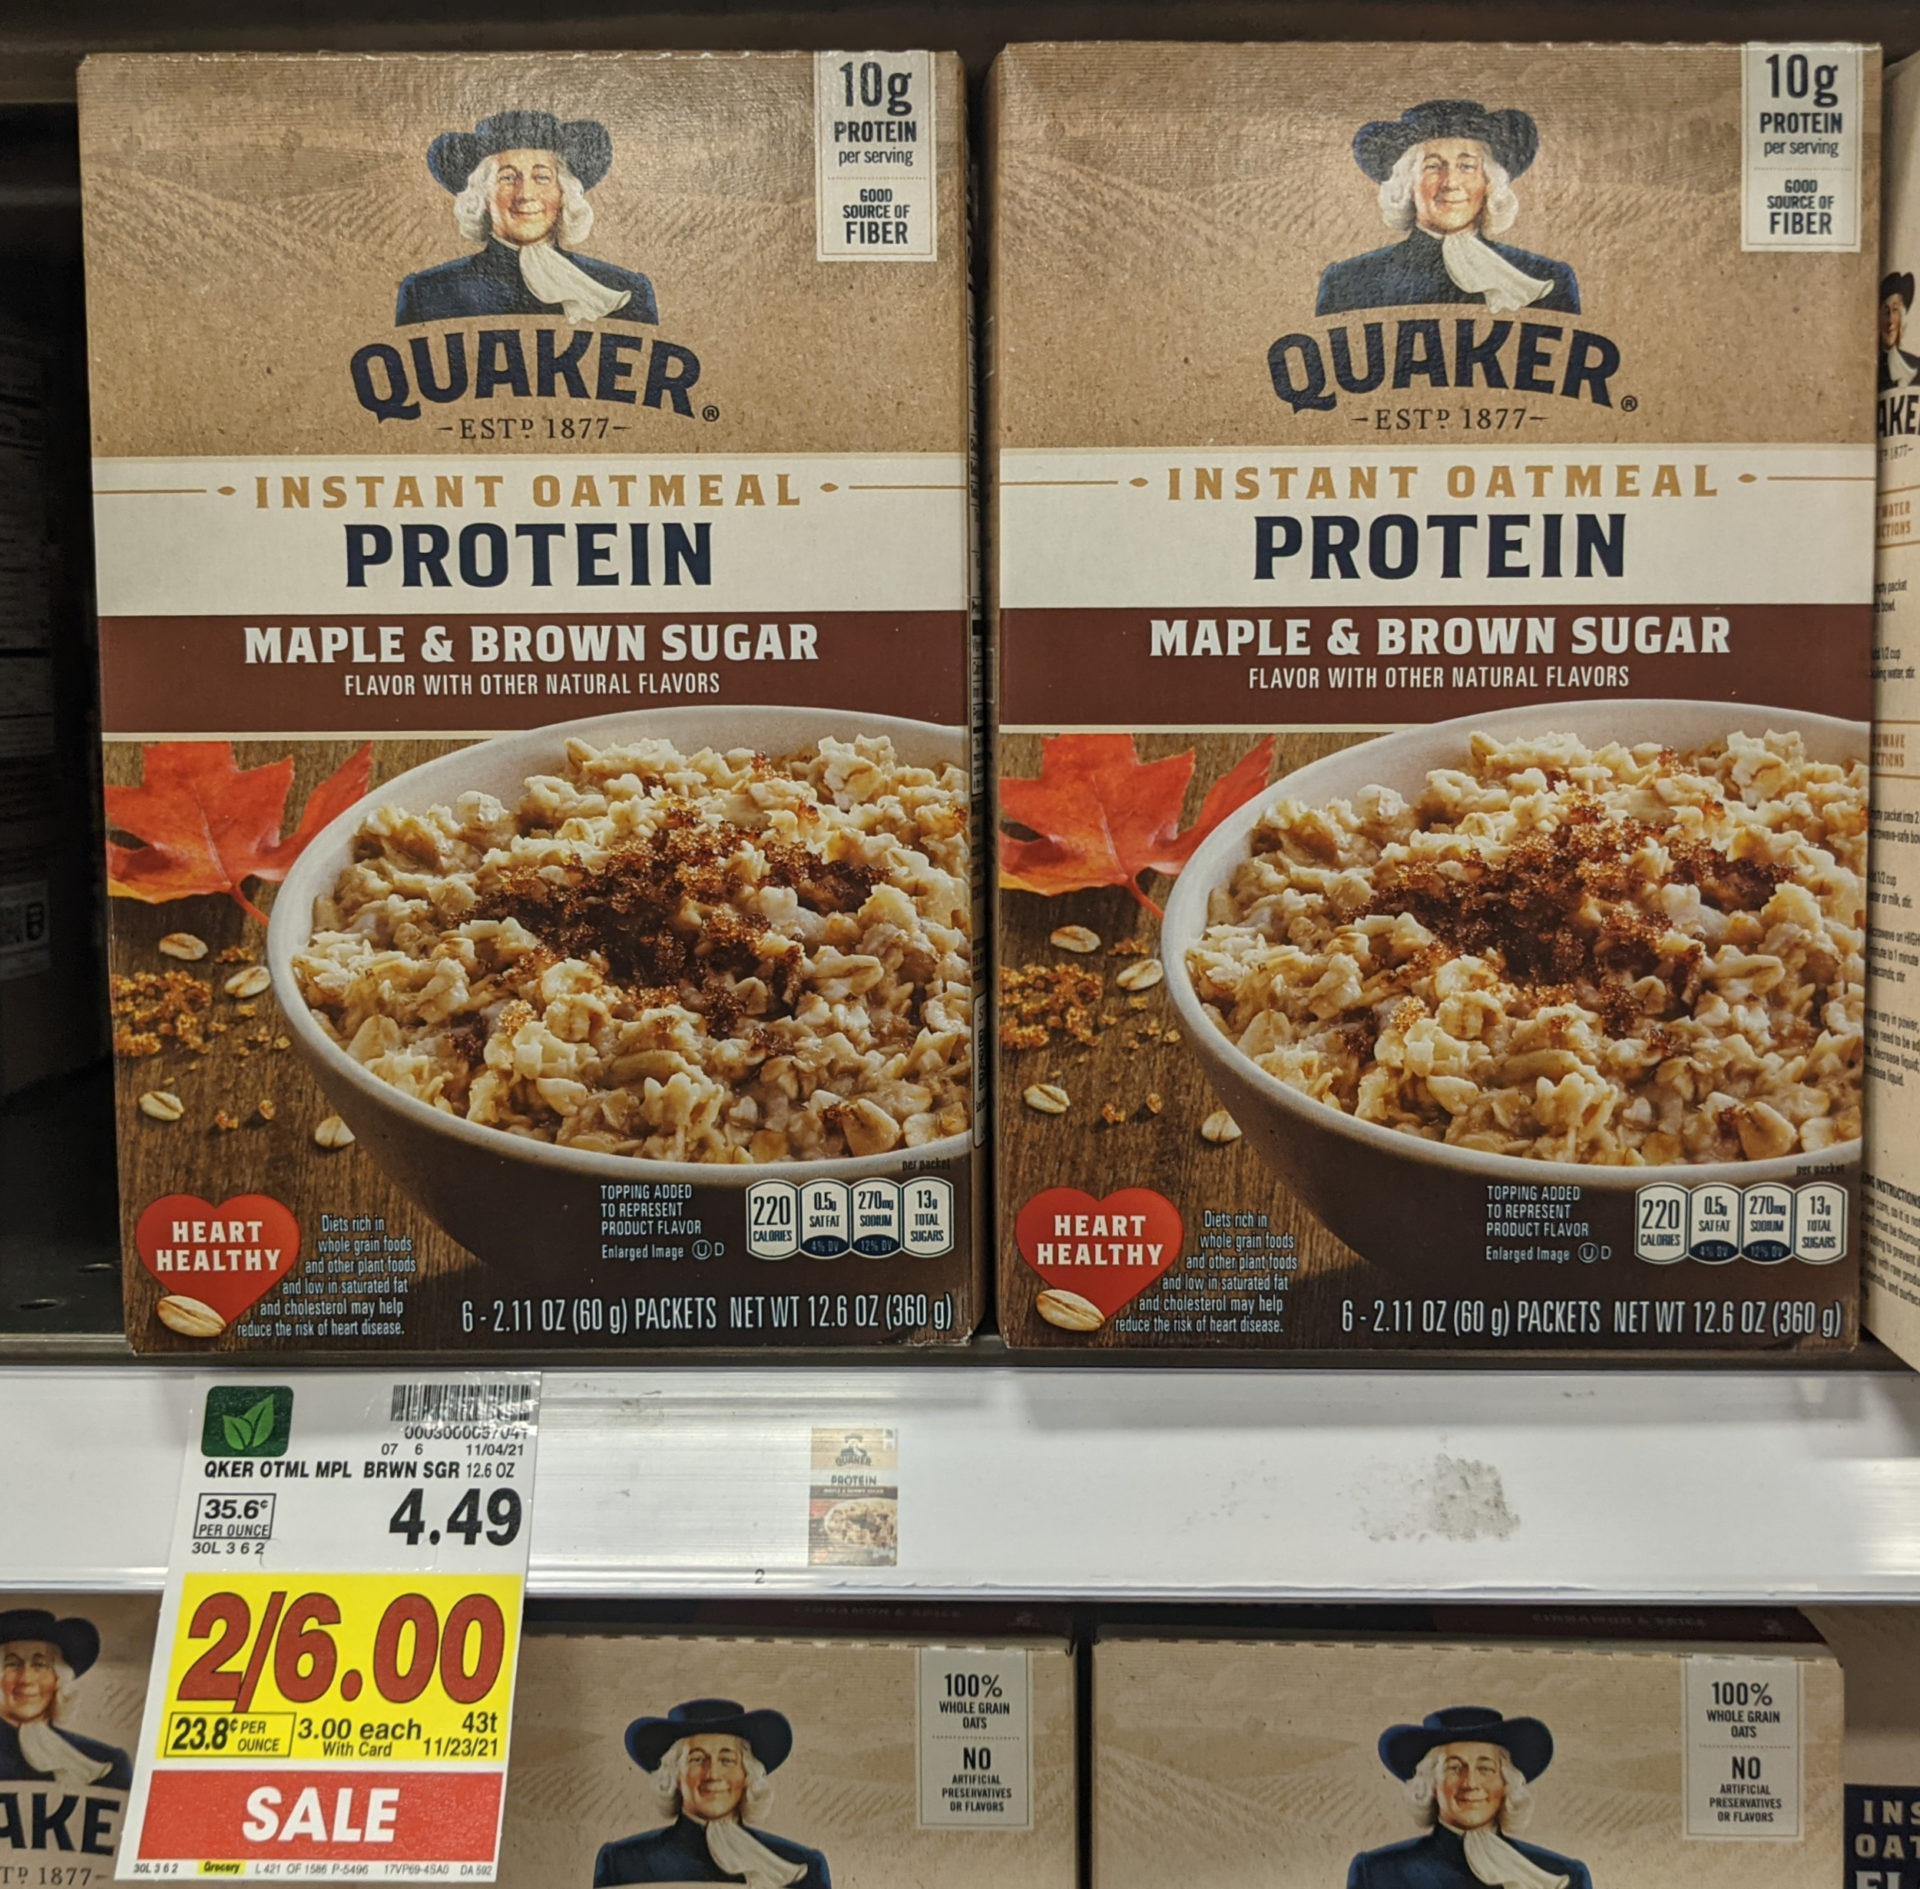 Quaker Protein Instant Oatmeal As Low As $1.94 At Kroger 1